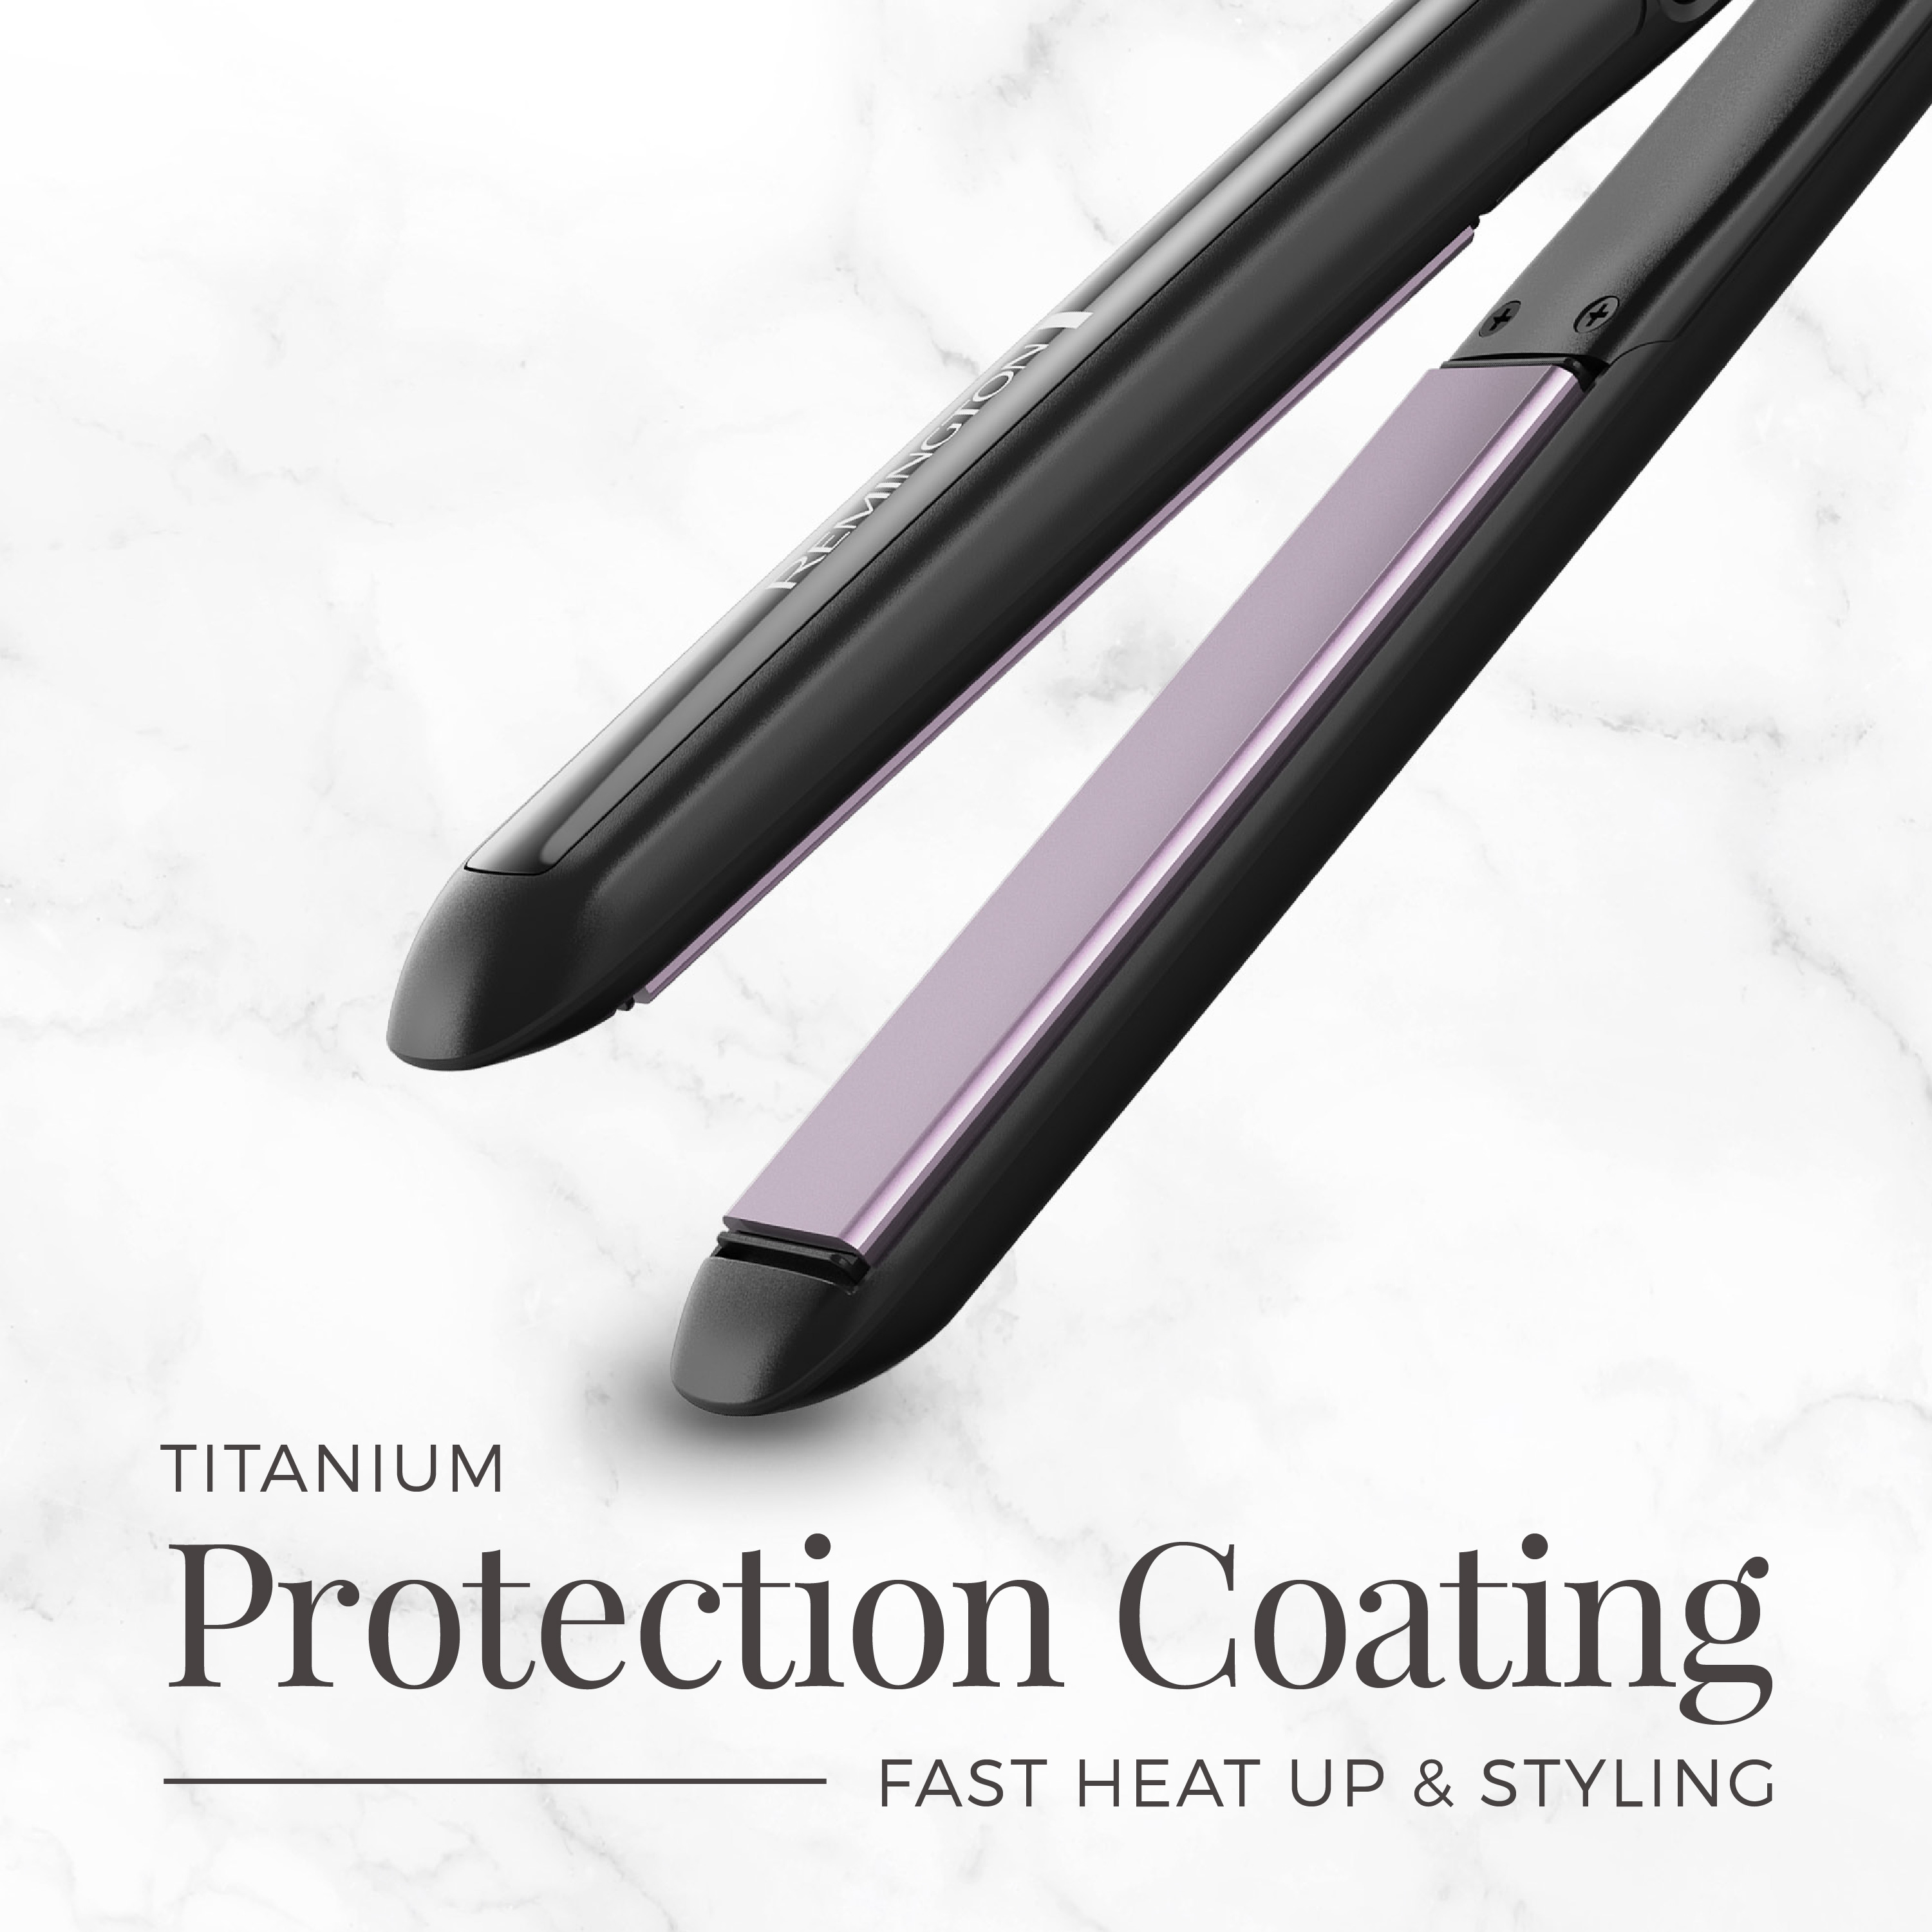 Remington 1" Anti-Static Flat Iron with Floating Ceramic Plates and Digital Controls, Hair Straightener, Black - image 5 of 8